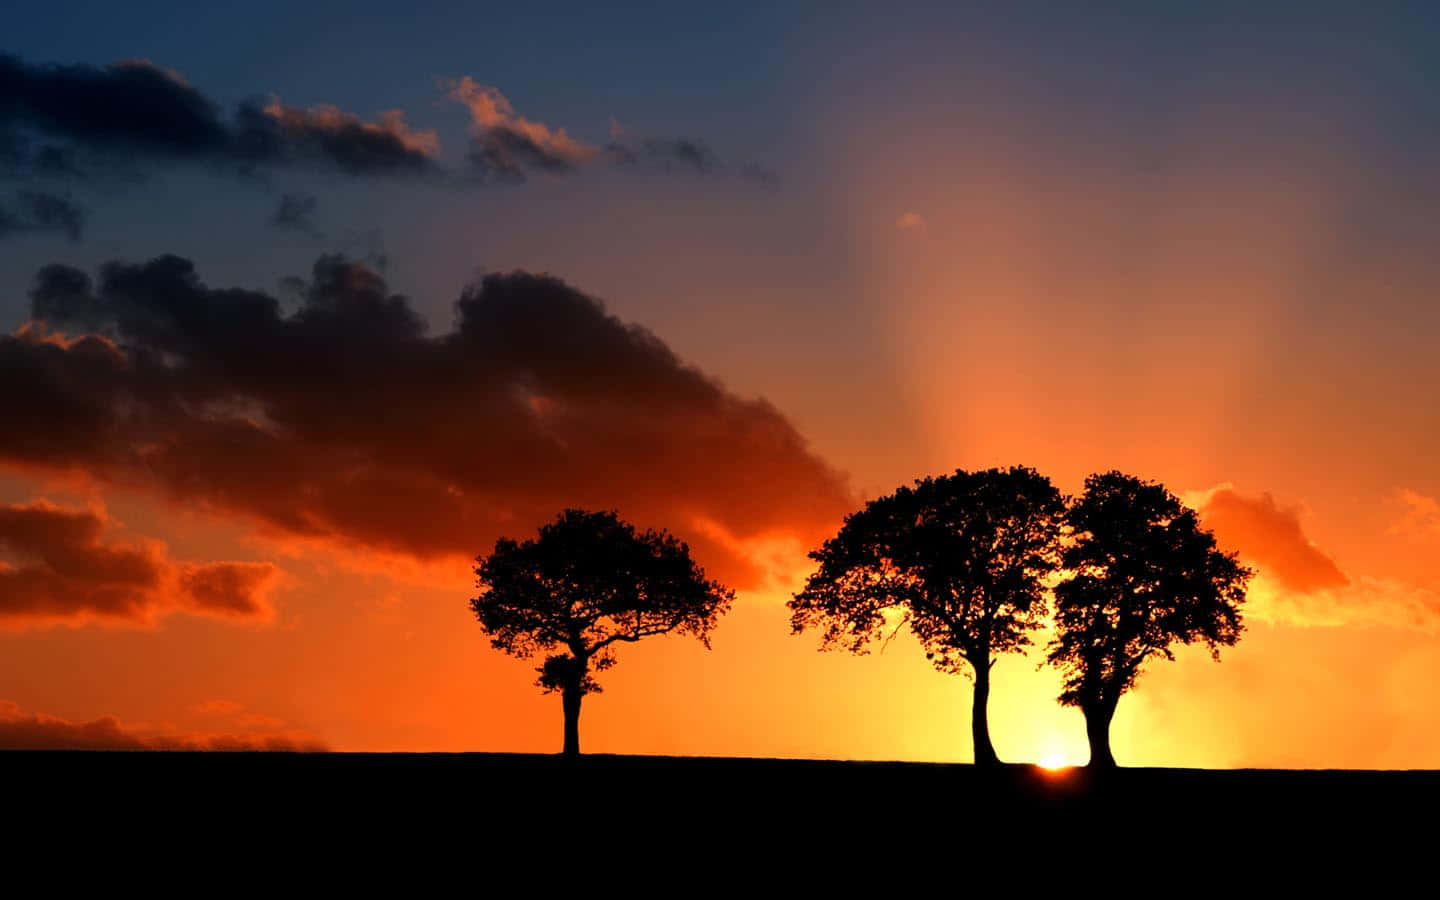 three trees silhouetted against the sunset